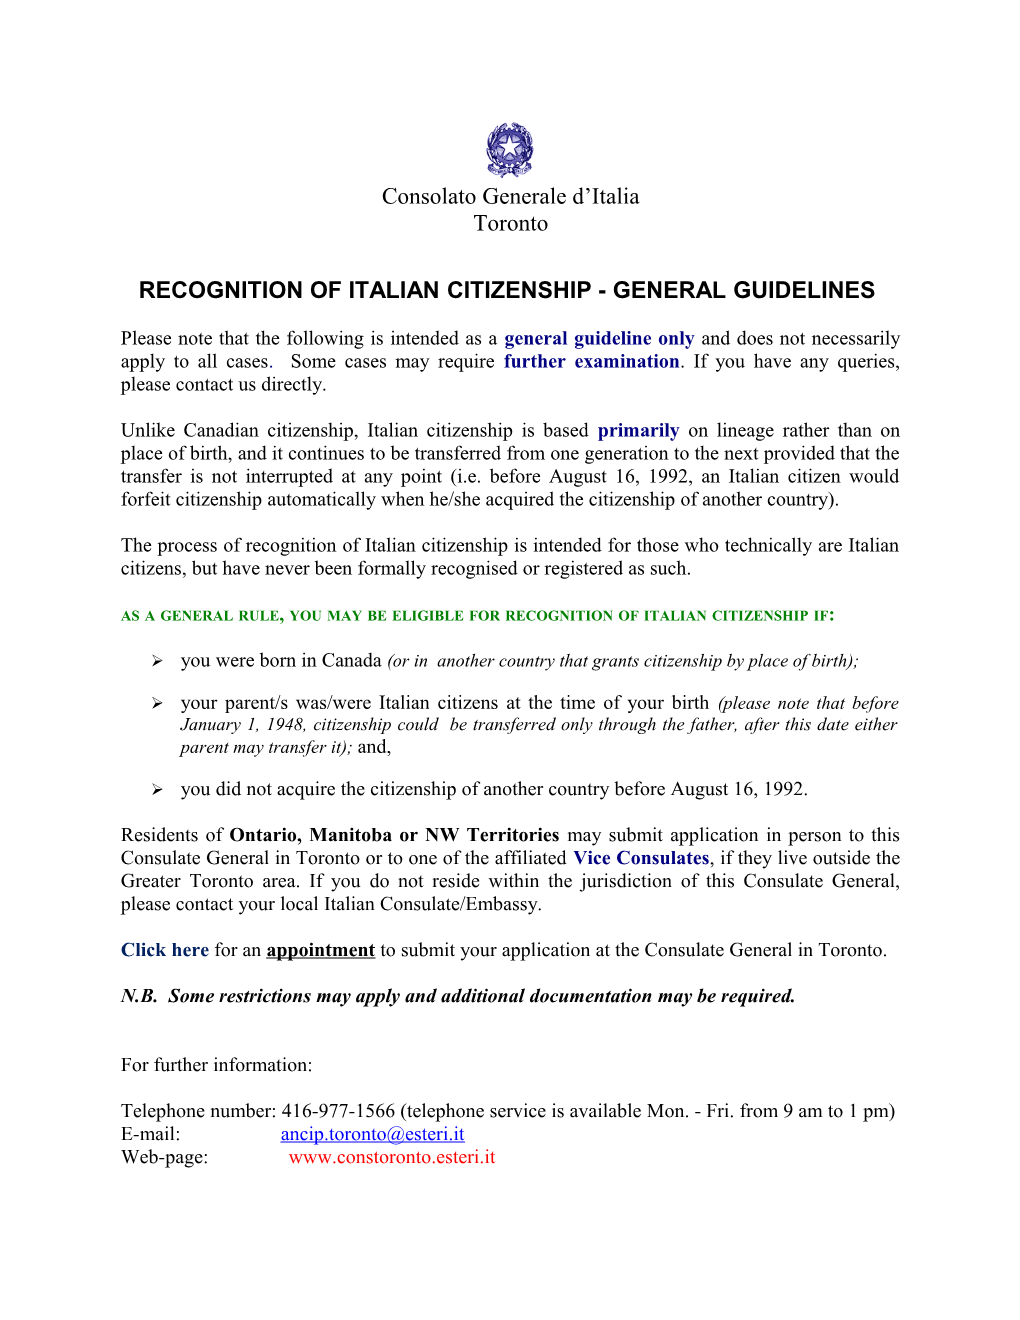 Recognition of Italian Citizenship - General Guidelines